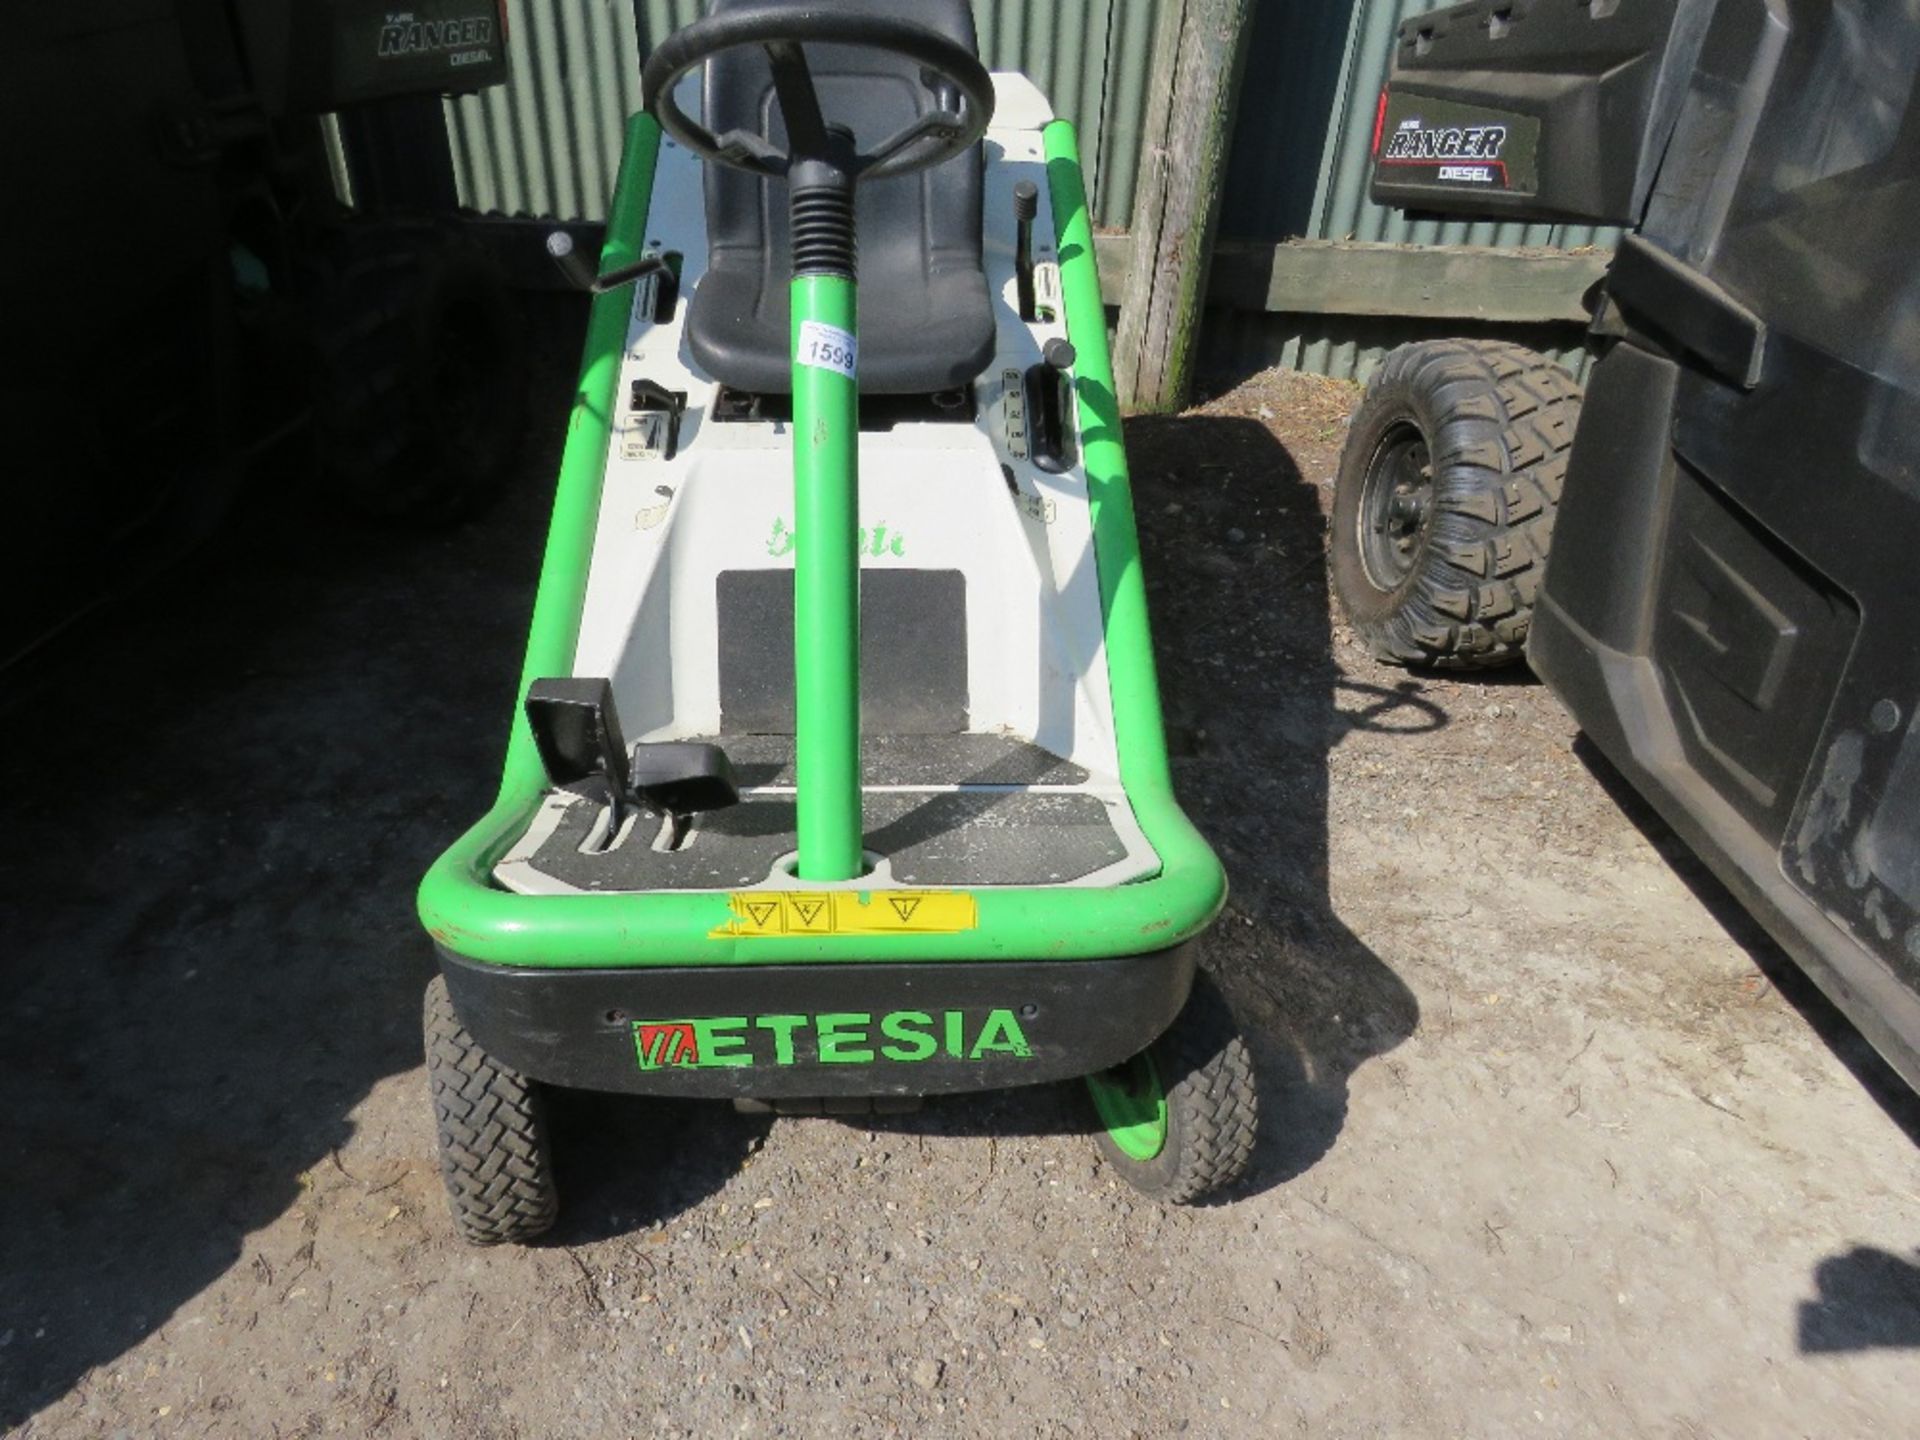 ETESIA PROFESSIONAL HYDRO RIDE ON MOWER WITH REAR COLLECTOR. WHEN TESTED WAS SEEN TO RUN AND DRIVE A - Image 3 of 9